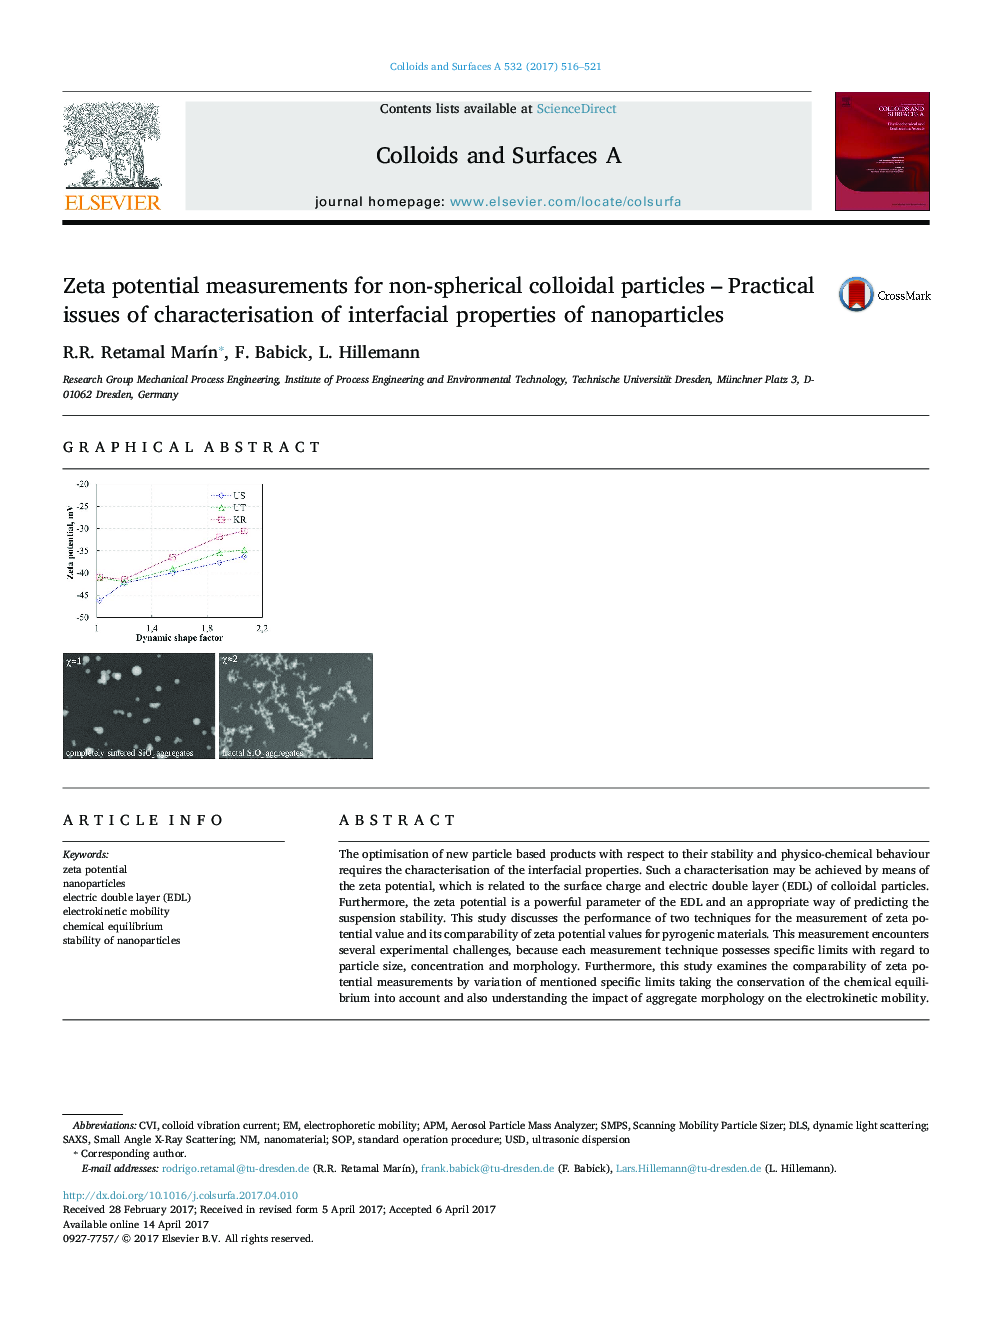 Zeta potential measurements for non-spherical colloidal particles - Practical issues of characterisation of interfacial properties of nanoparticles